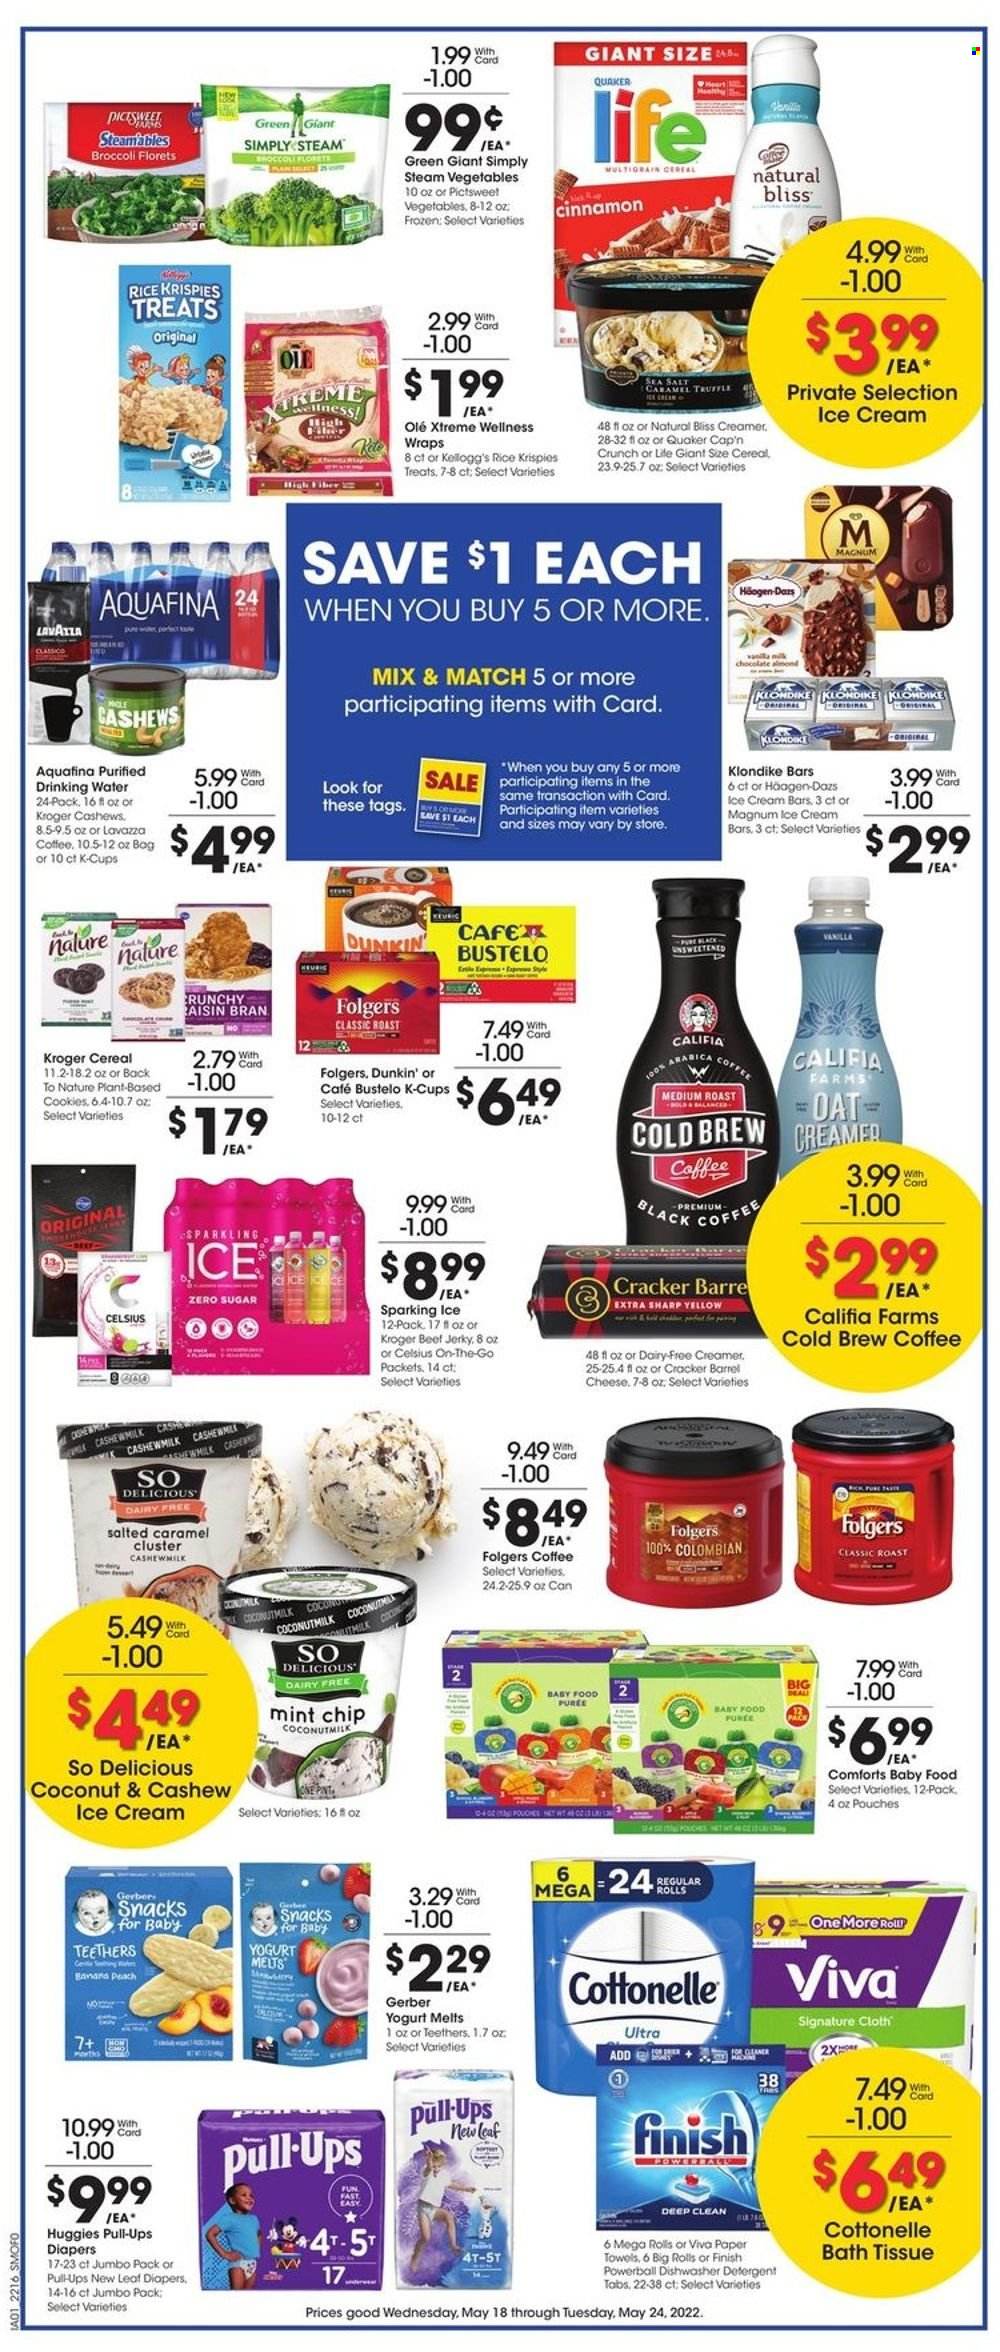 thumbnail - Smith's Flyer - 05/18/2022 - 05/24/2022 - Sales products - wraps, broccoli, Quaker, beef jerky, jerky, cheese, yoghurt, creamer, Magnum, ice cream, ice cream bars, Häagen-Dazs, cookies, snack, truffles, crackers, Kellogg's, Gerber, coconut milk, cereals, Rice Krispies, Cap'n Crunch, cinnamon, cashews, Aquafina, coffee, Folgers, coffee capsules, K-Cups, Lavazza, Huggies, nappies, bath tissue, Cottonelle, kitchen towels, paper towels, detergent, Finish Powerball. Page 3.